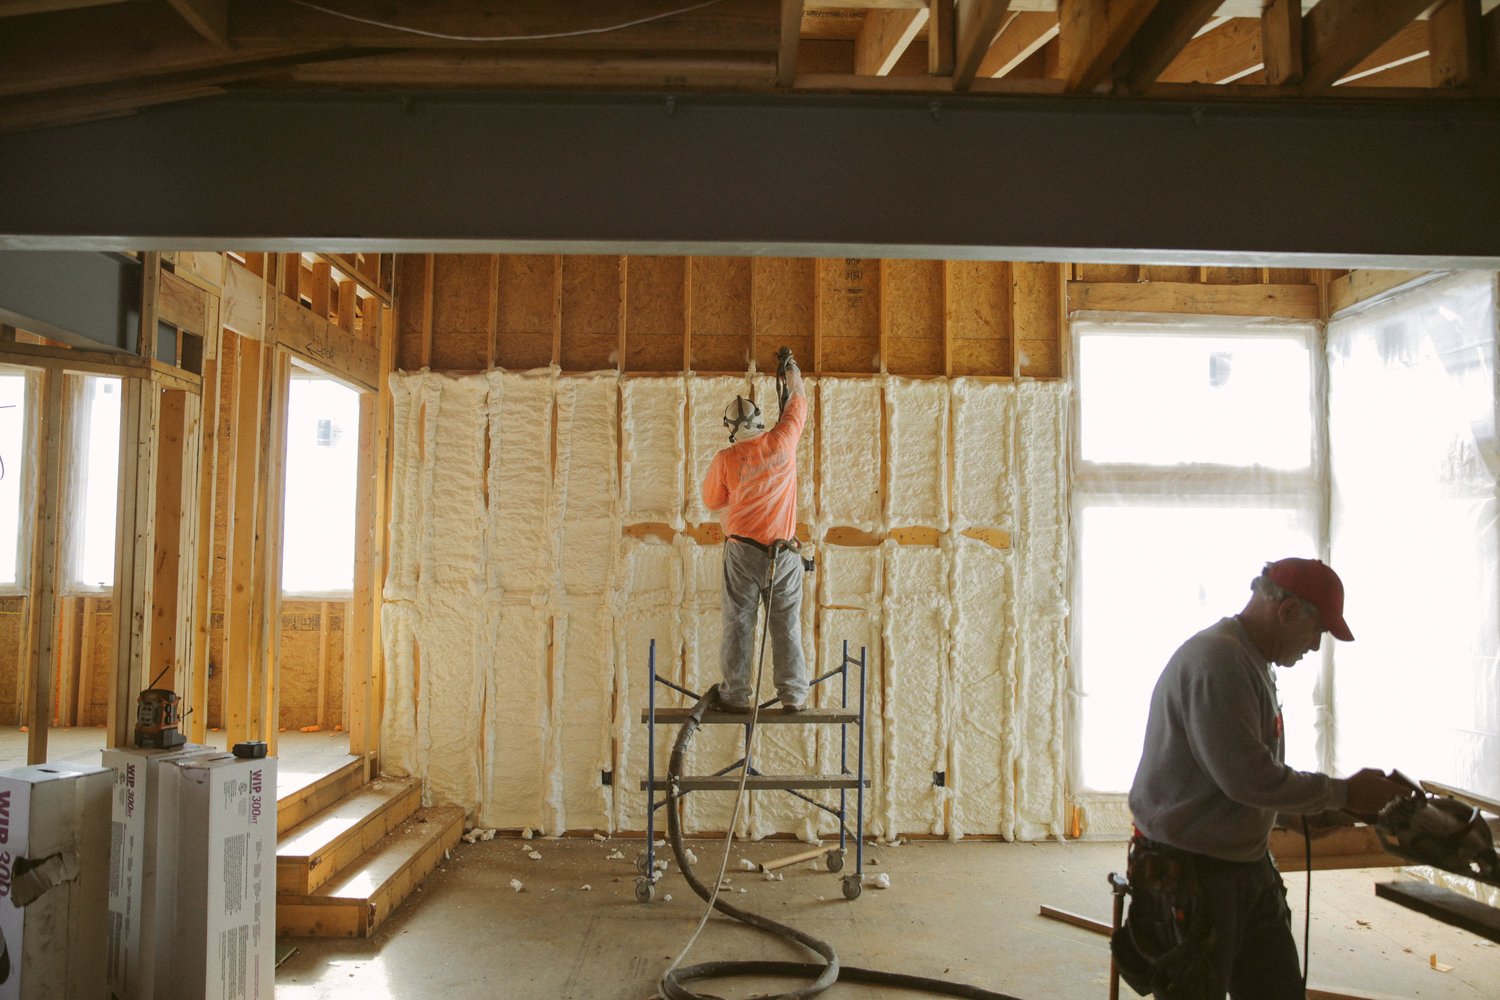 🌟 Sit back, relax, and let us handle the rest! 🌟
-
Our expert spray foam insulation installers work hard, ensuring your project is cozy and energy-efficient. While they work their magic, you can relax knowing we've got you covered!
-
Learn more abo